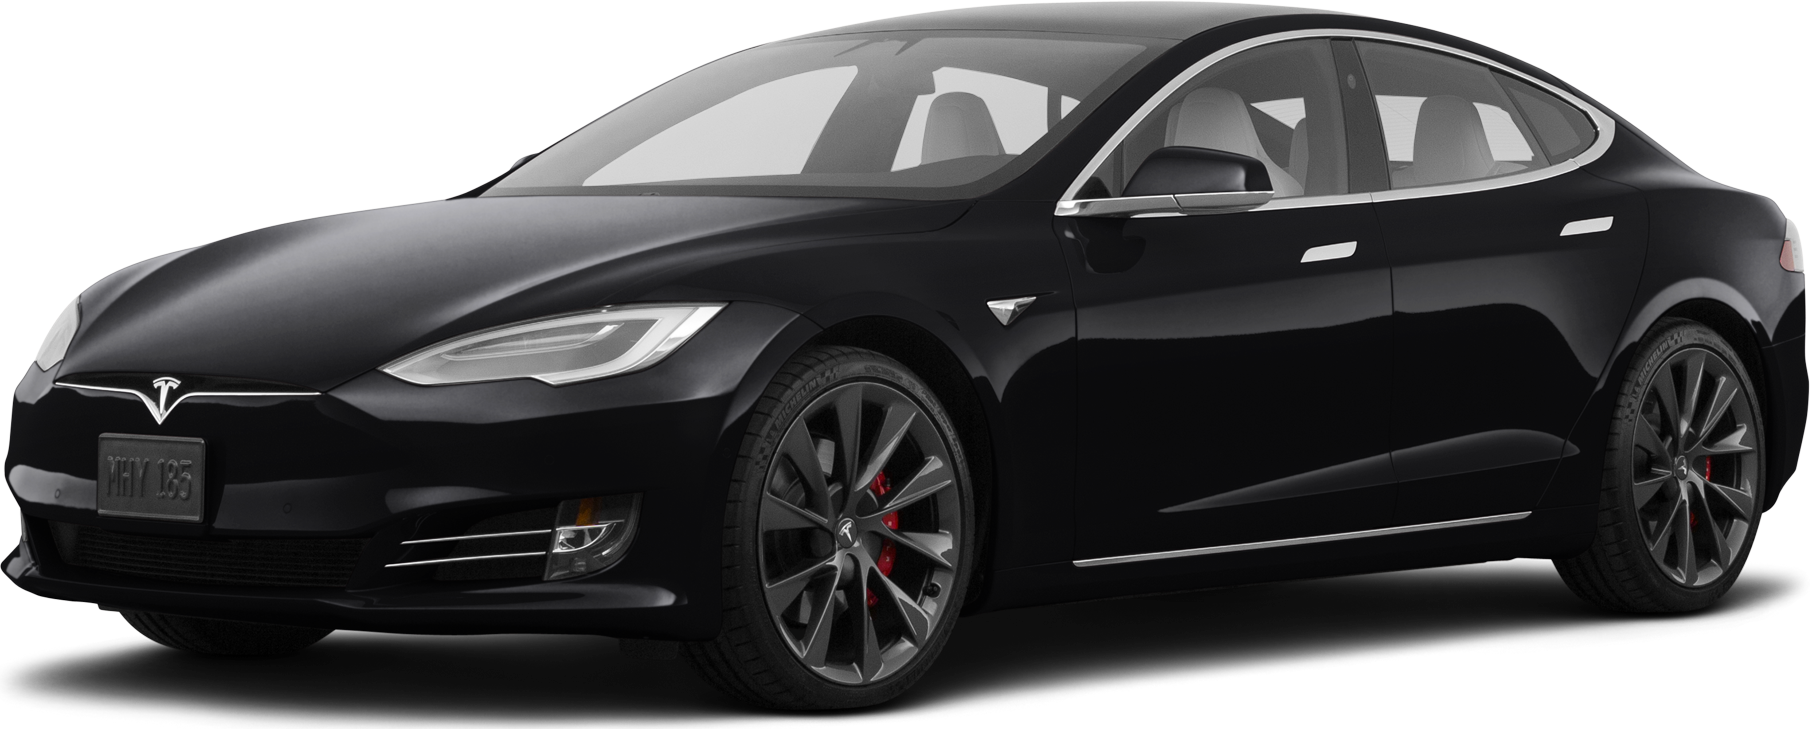 2019 Tesla Model S Specs and Features